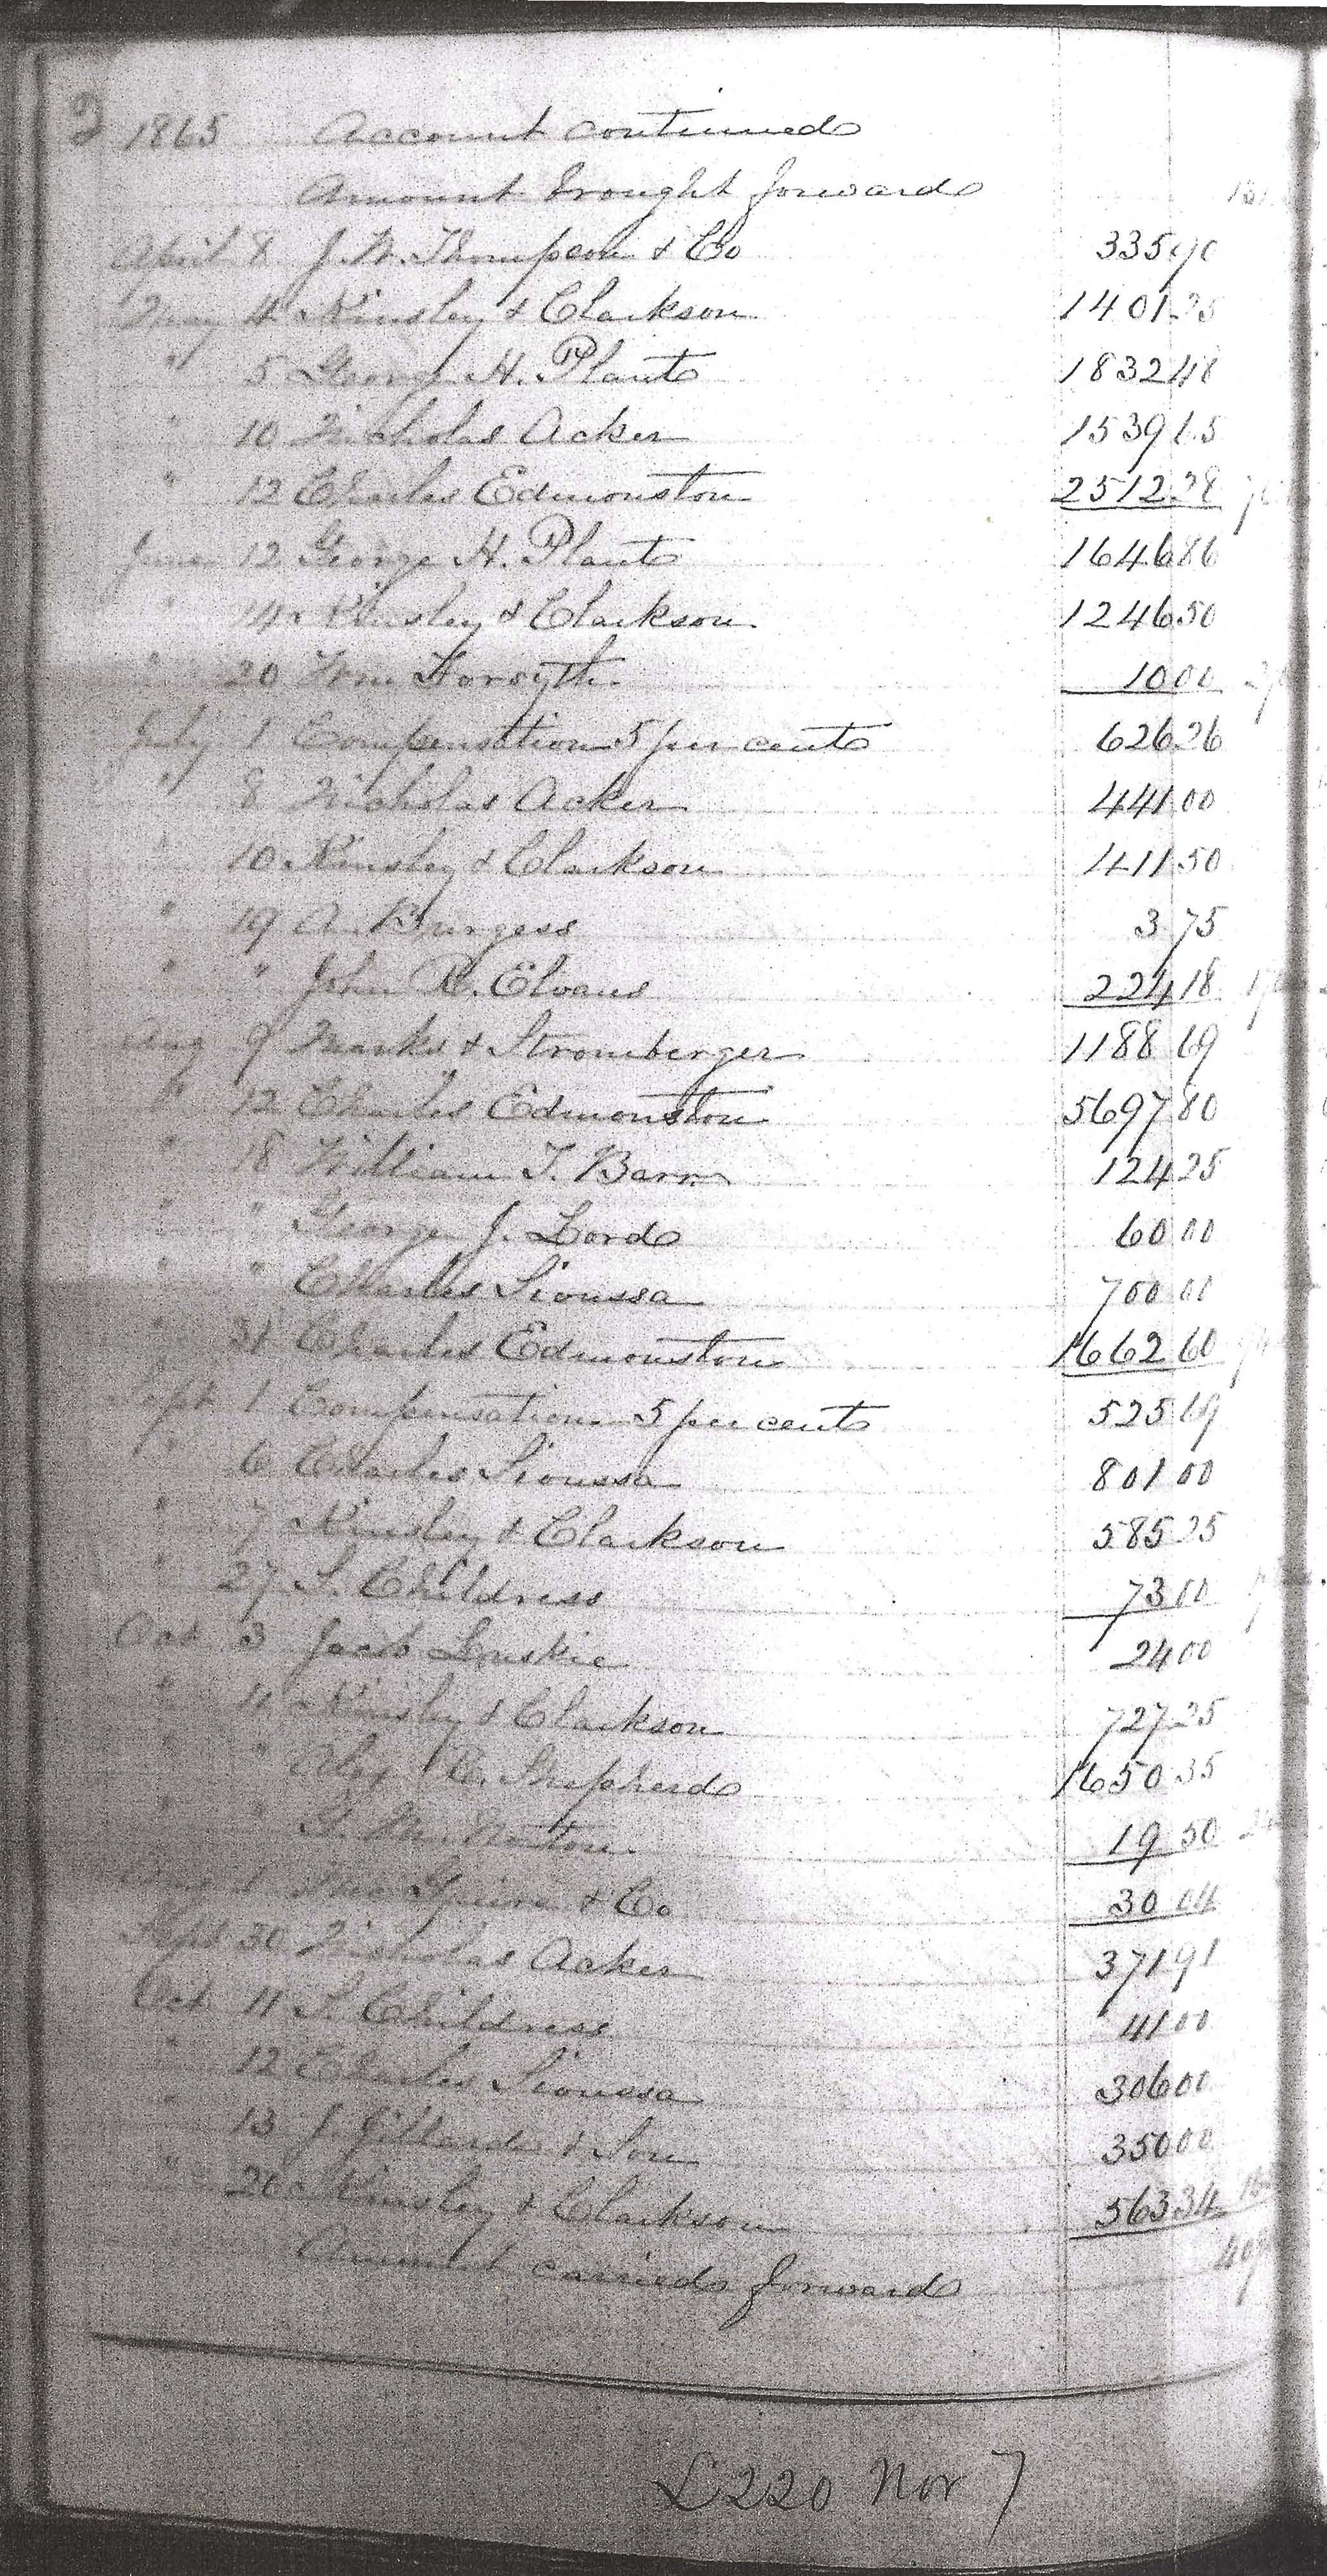 Monthly Report of the Superintendent of Construction, November 1, 1866, Page 2 of 4